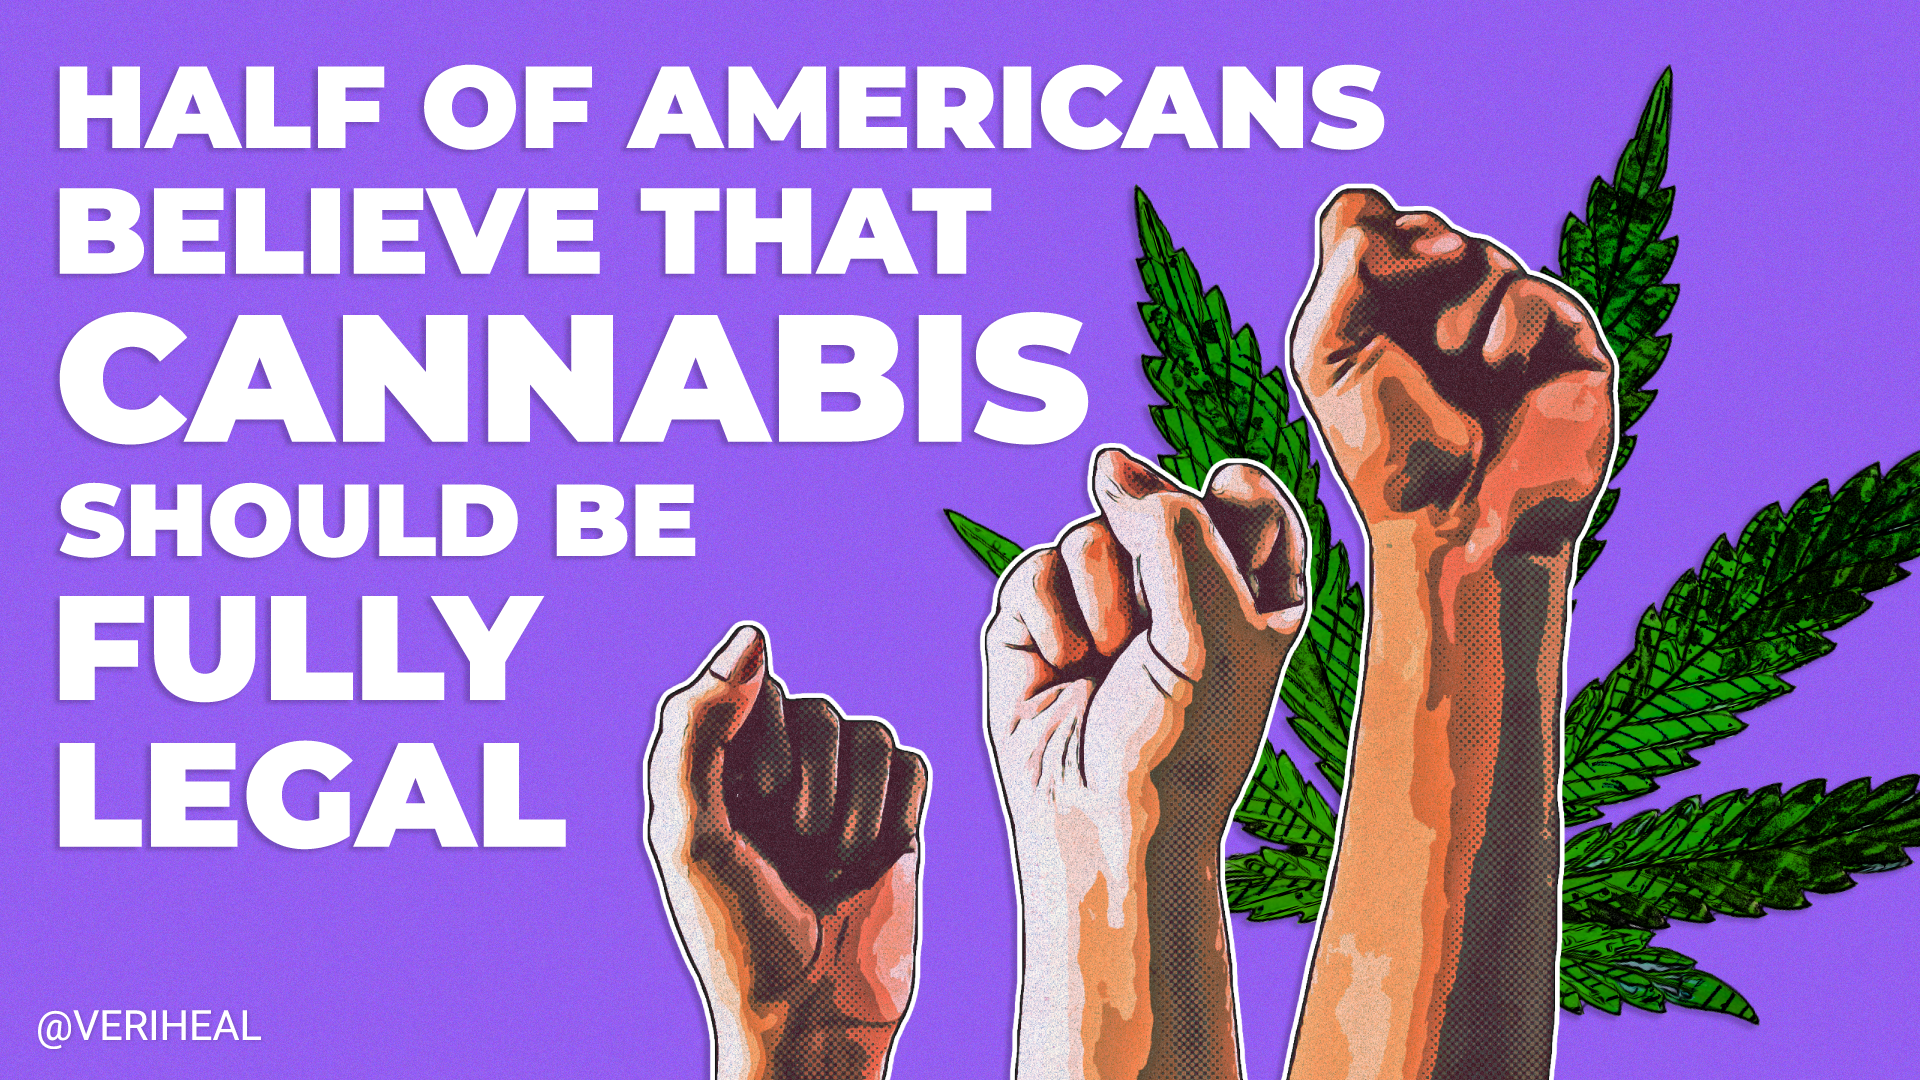 New Poll Shows 57% of Americans Want Legal Cannabis